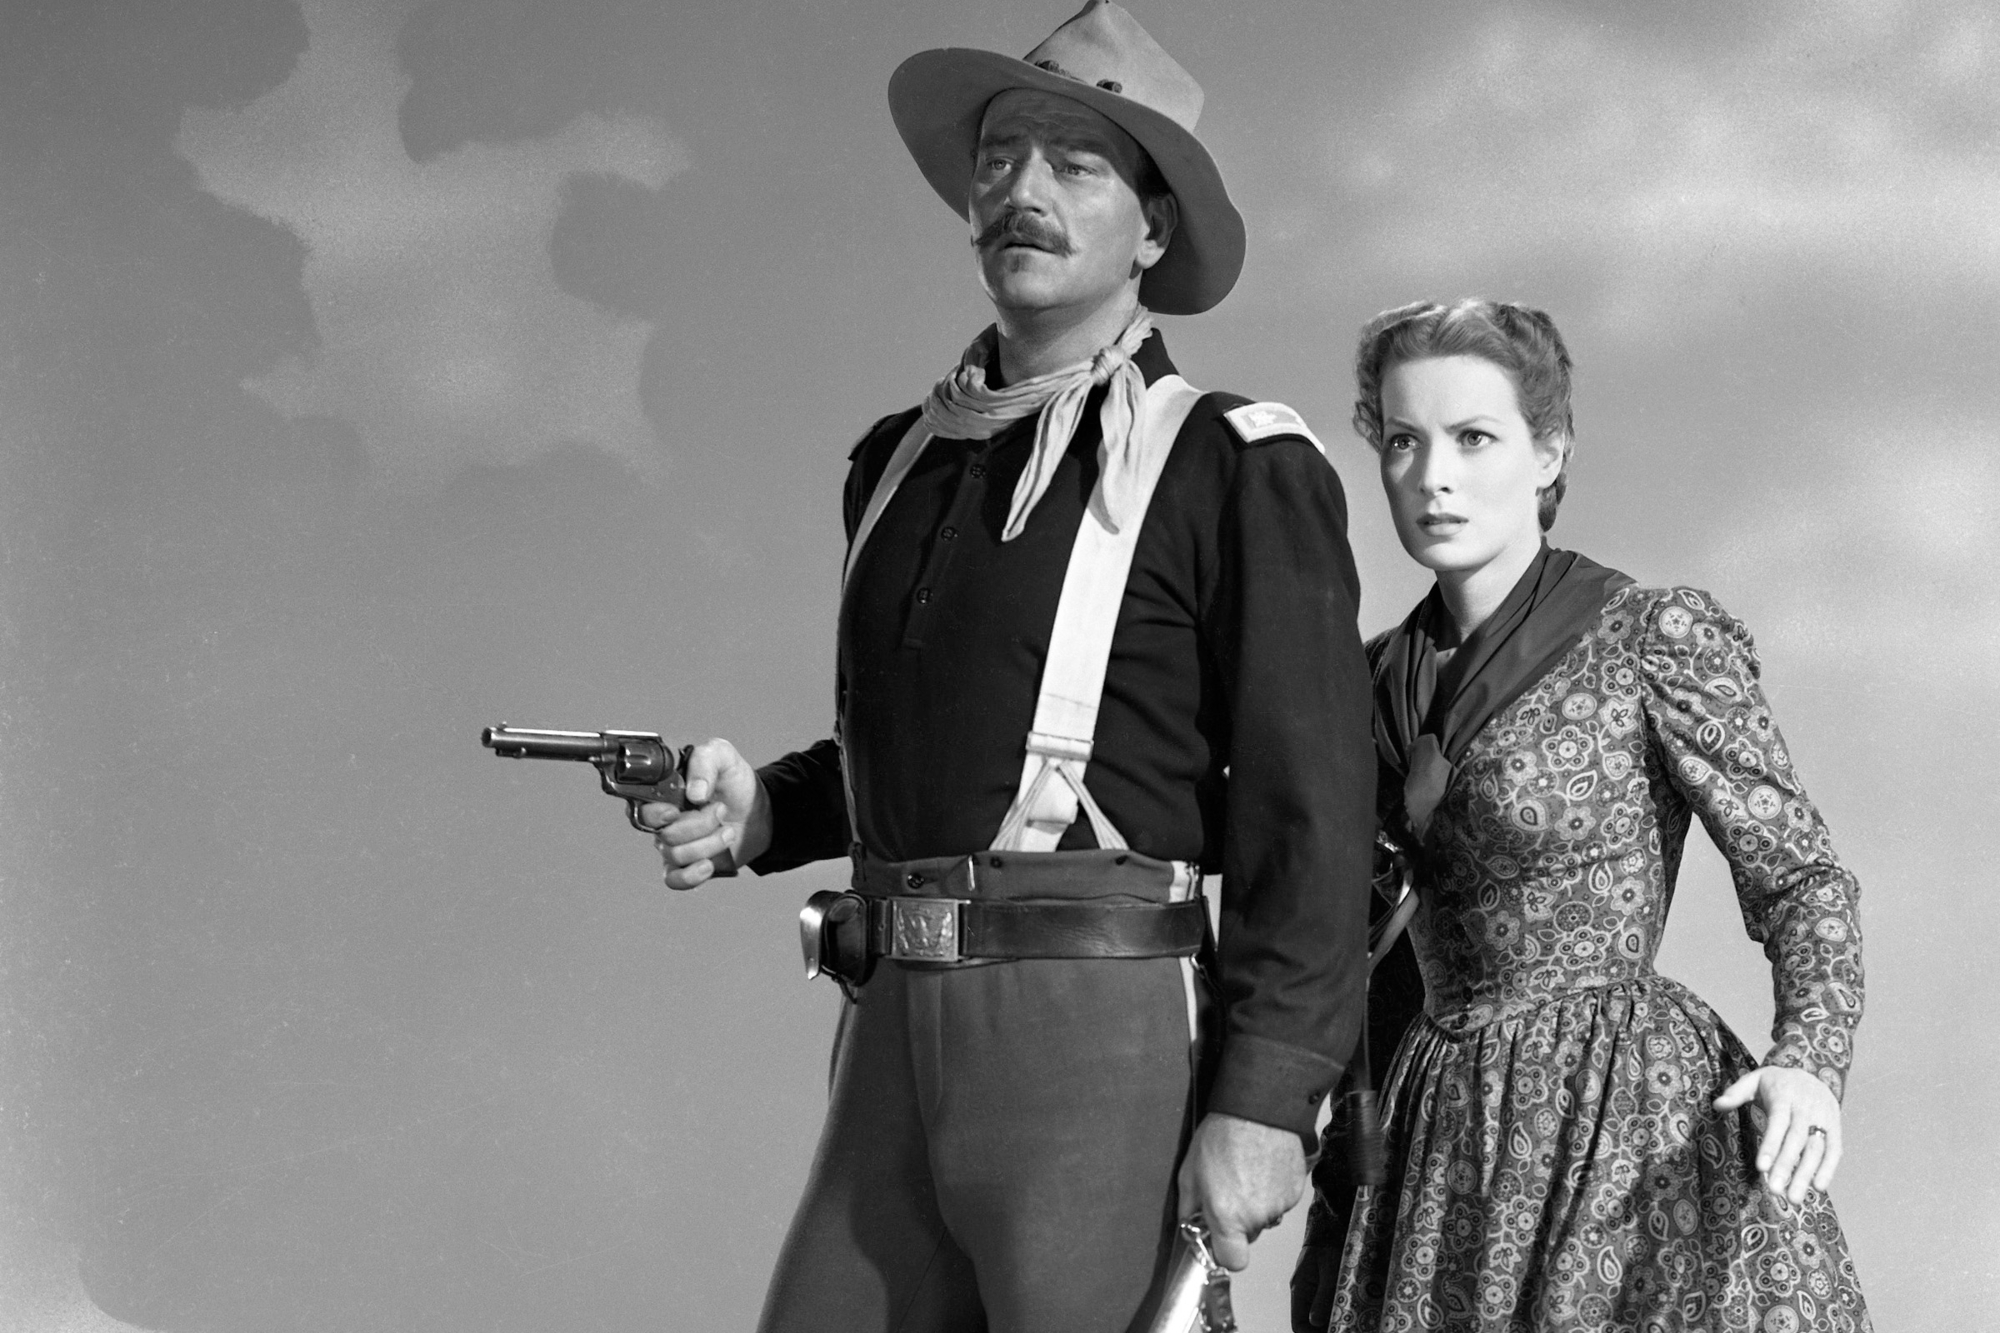 John Wayne as Lieutenant Colonel Kirby Yorke and Maureen O'Hara as Mrs Kathleen Yorke in a black-and-white picture. Wayne is holding his pistol out and O'Hara is holding onto his shoulder.